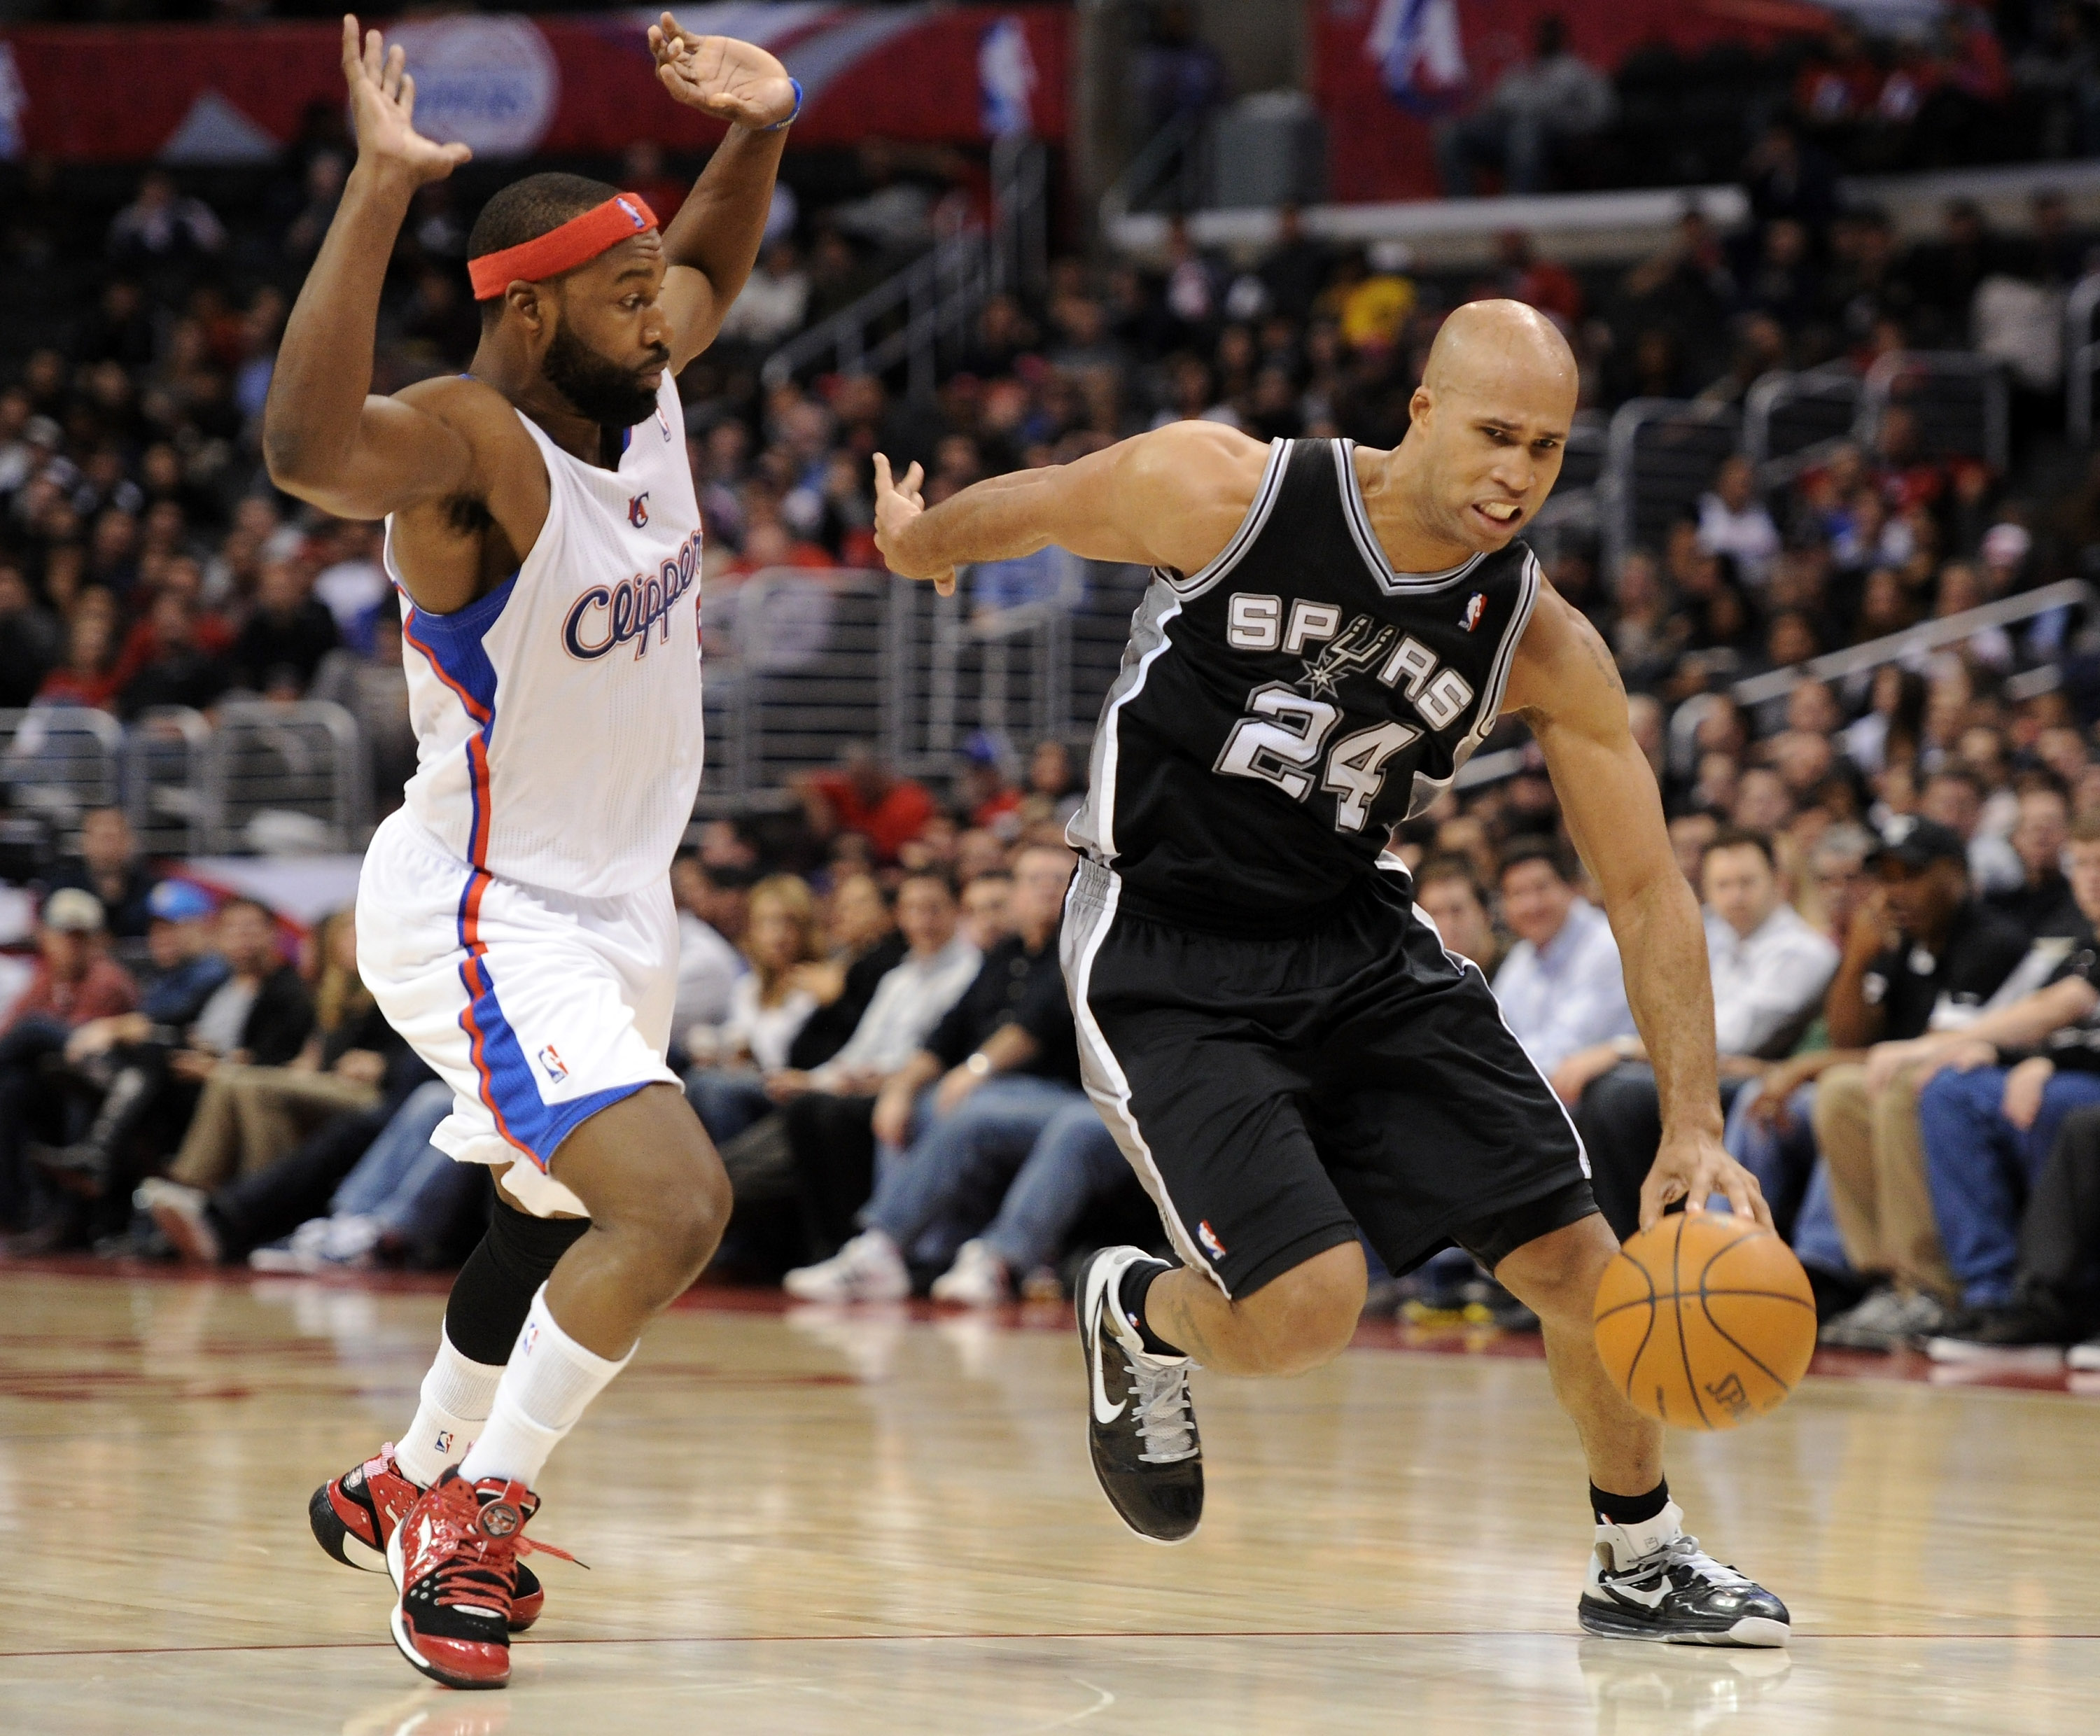 LOS ANGELES, CA - DECEMBER 01:  Richard Jefferson #24 of the San Antonio Spurs dribbles around Baron Davis #5 of the Los Angeles Clippers at the Staples Center on December 1, 2010 in Los Angeles, California.  NOTE TO USER: User expressly acknowledges and 